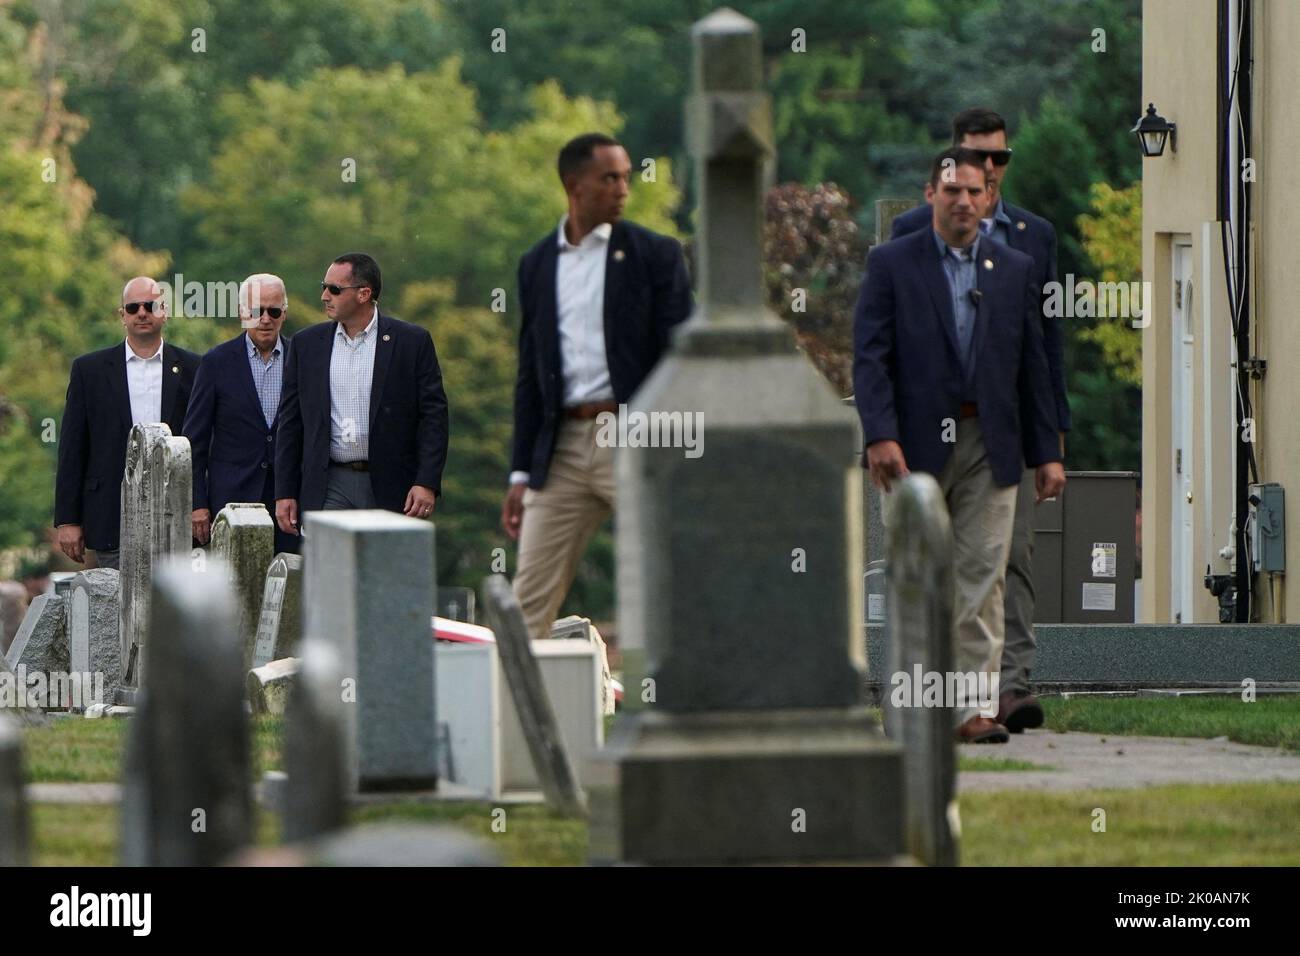 U.S. President Joe Biden walks with Secret Service agents after visiting the family grave plot at St. Joseph on the Brandywine Catholic Church after attending Mass in Wilmington, Delaware, U.S., September 10, 2022.  REUTERS/Joshua Roberts Stock Photo